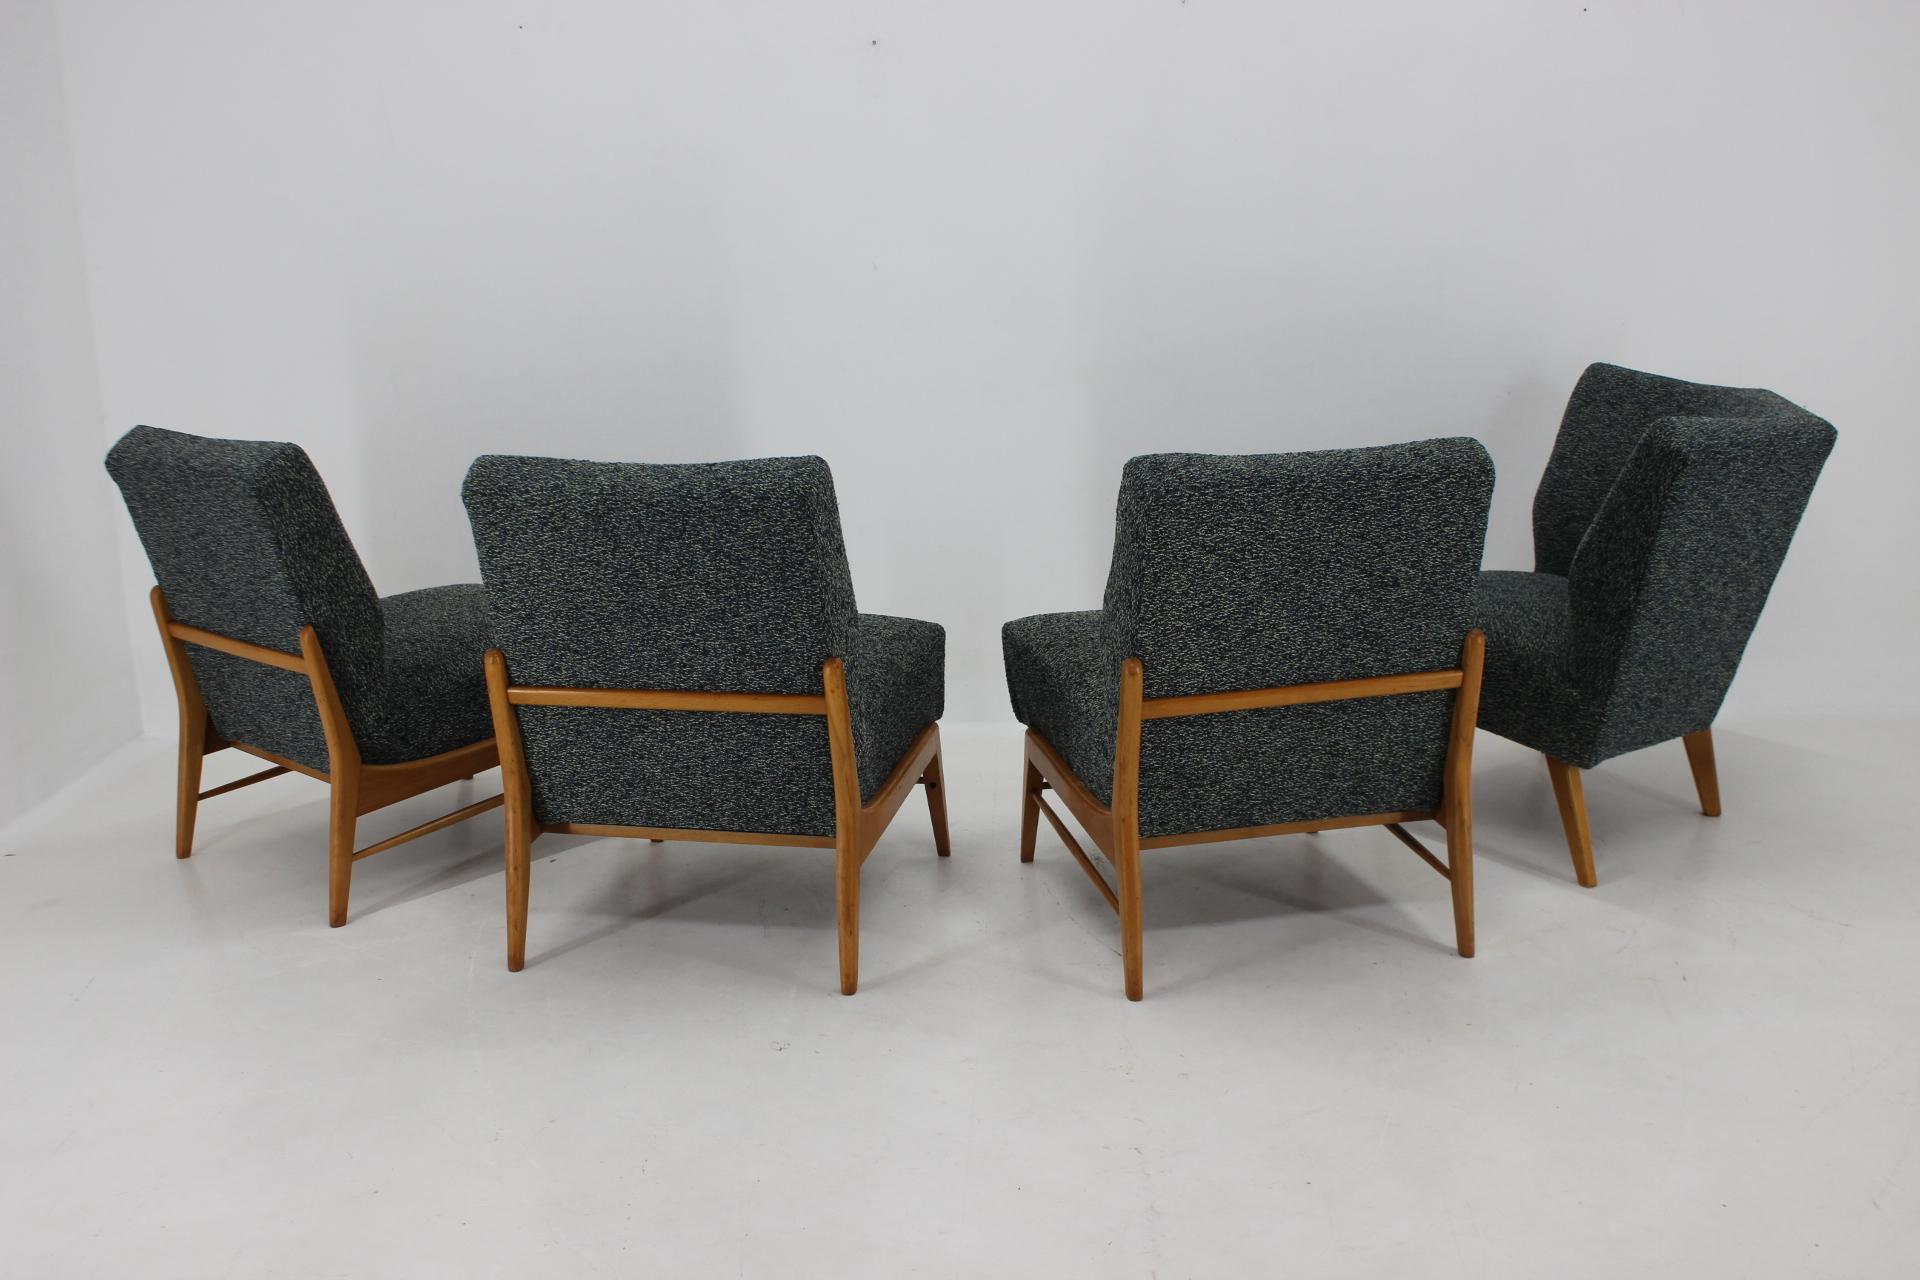 1970s Modular Sofa or Chairs in Beech wood and Kirgby Fabric, Czechoslovakia For Sale 4